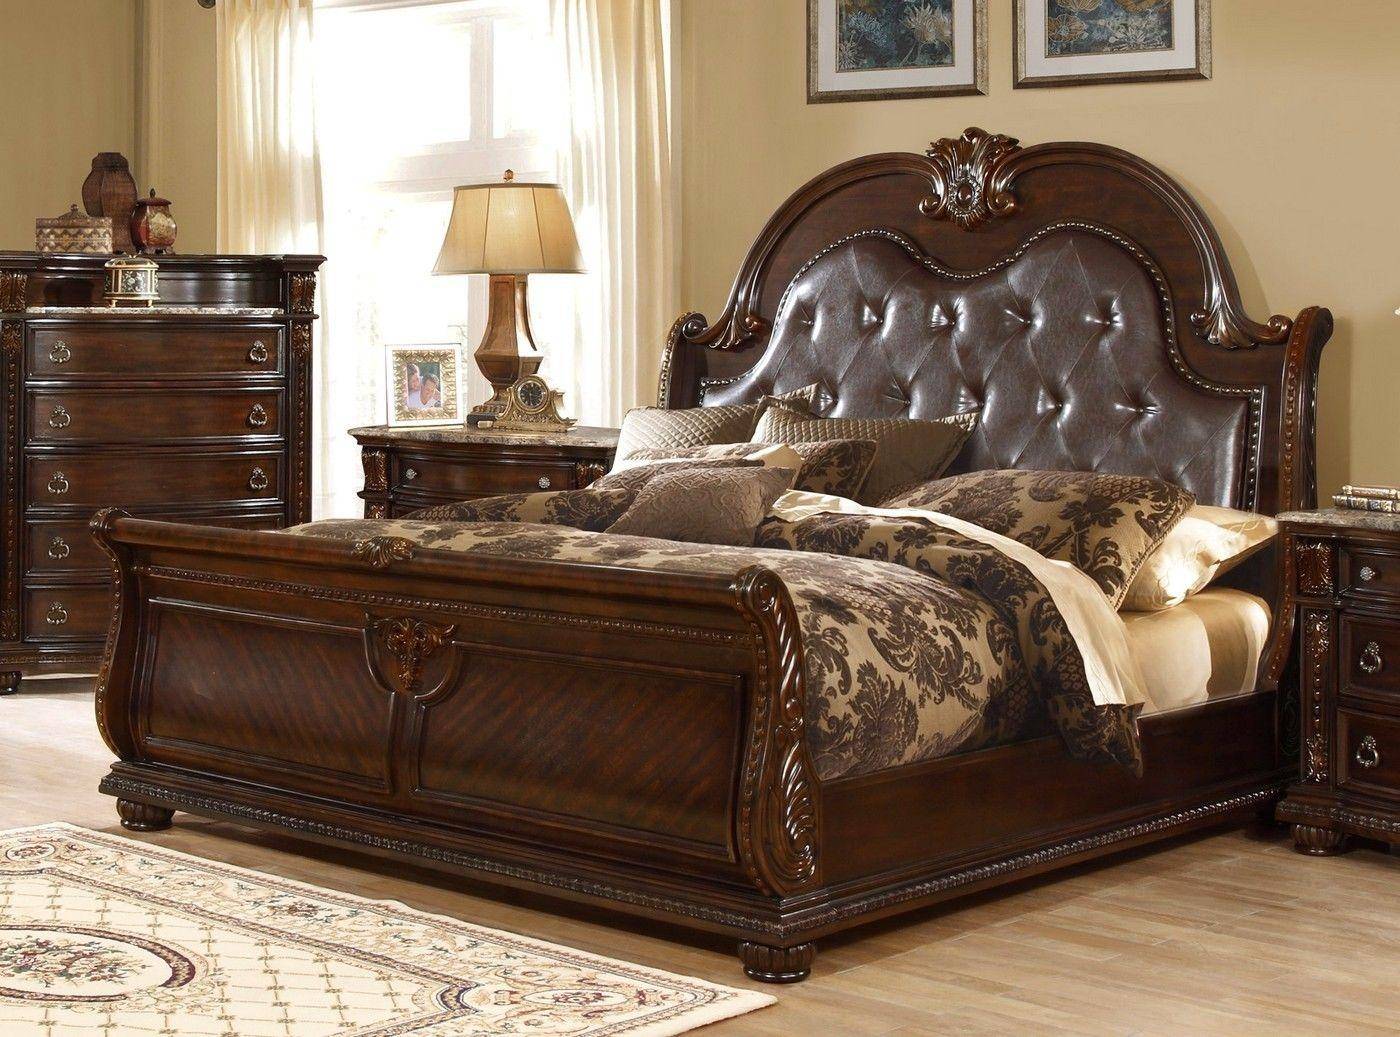 California King Sleigh Bedroom Set, Cherry Wood Bed With Leather Headboard